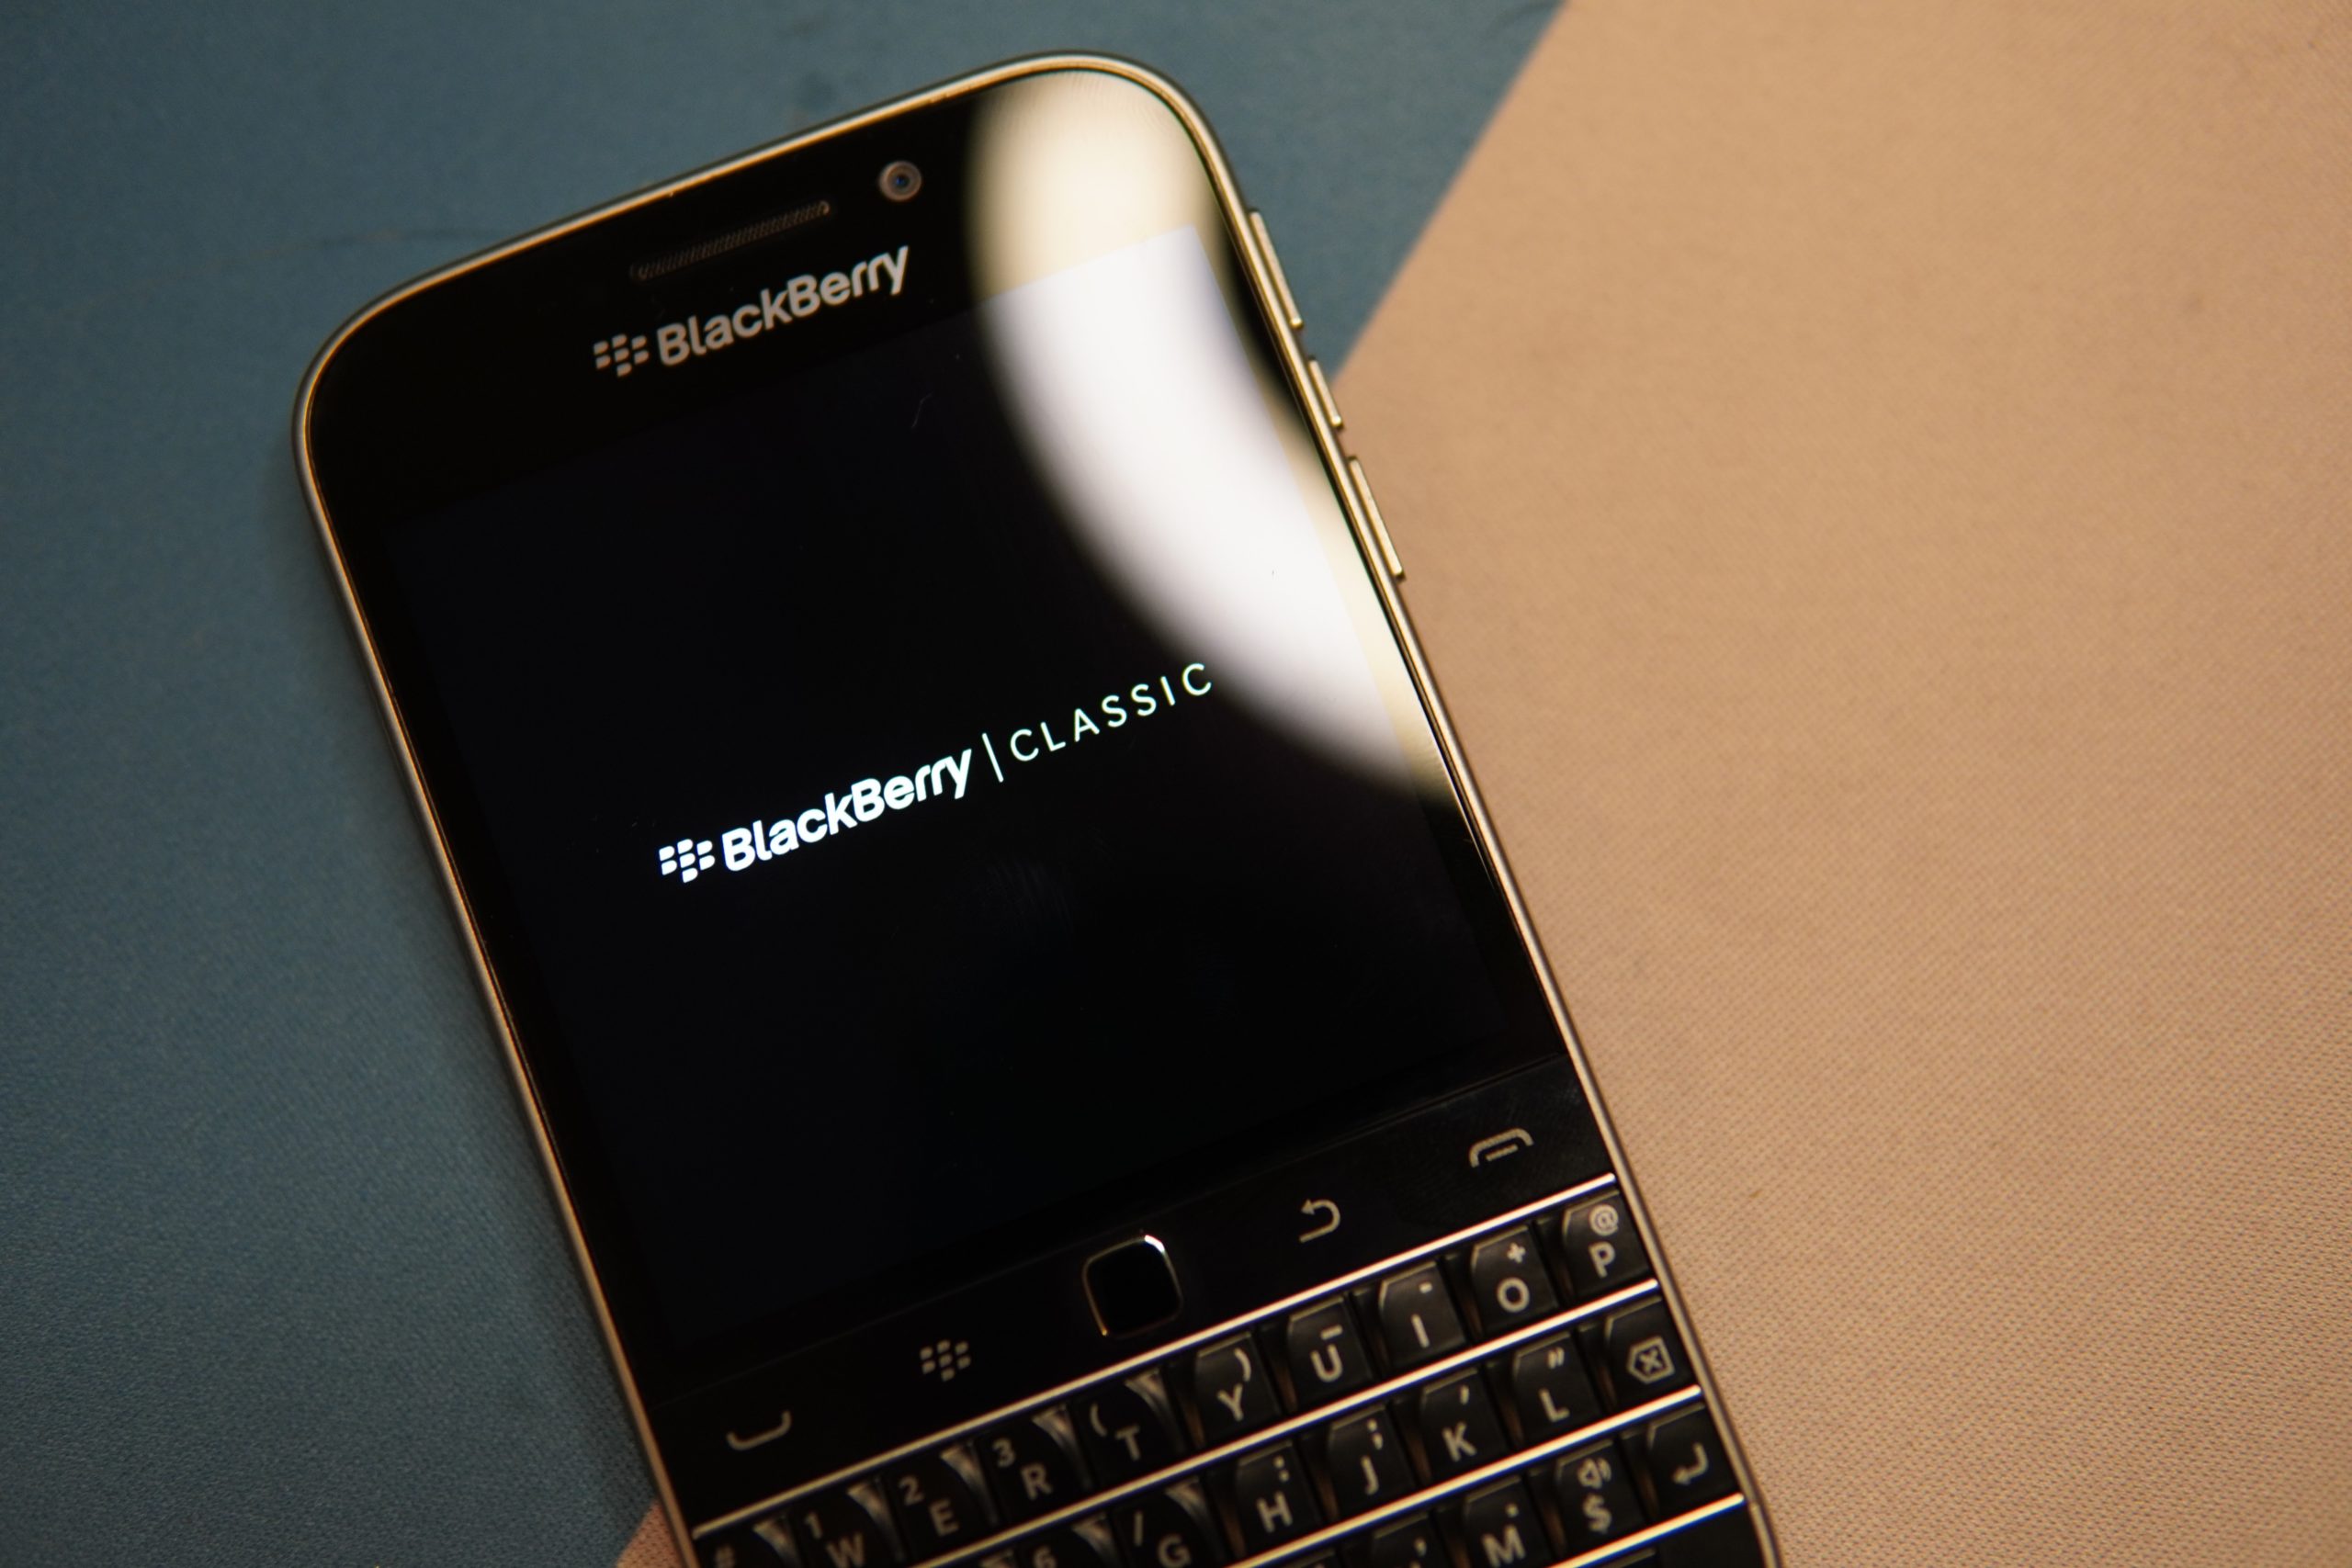 It’s the end of an era for one of the classics: the BlackBerry Phone